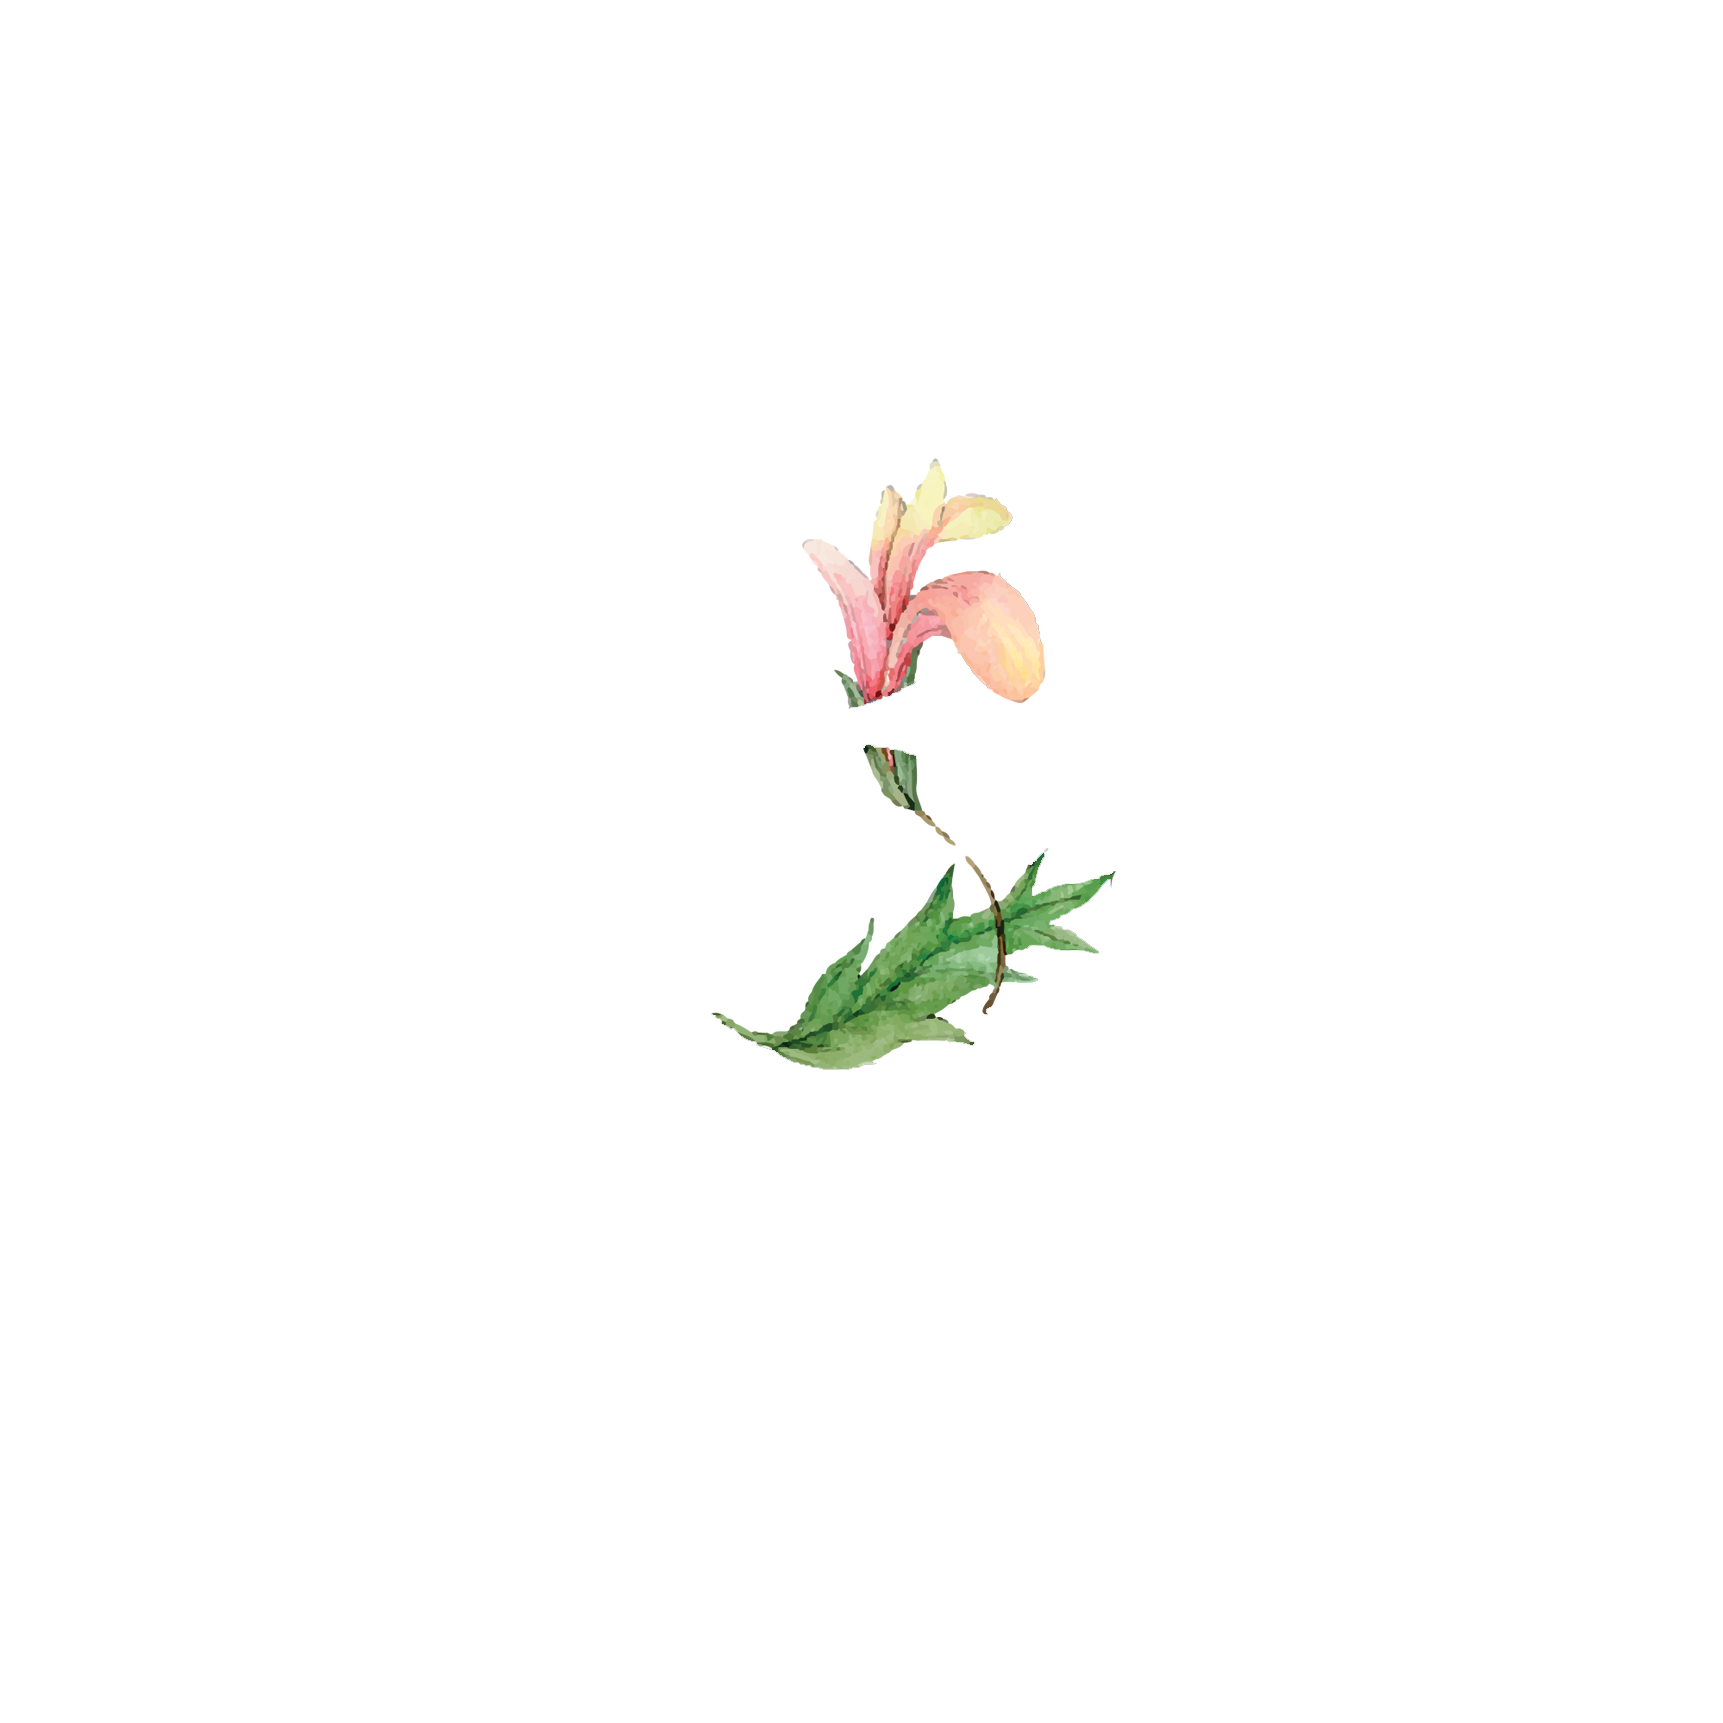 Click to read Day 3 - Body